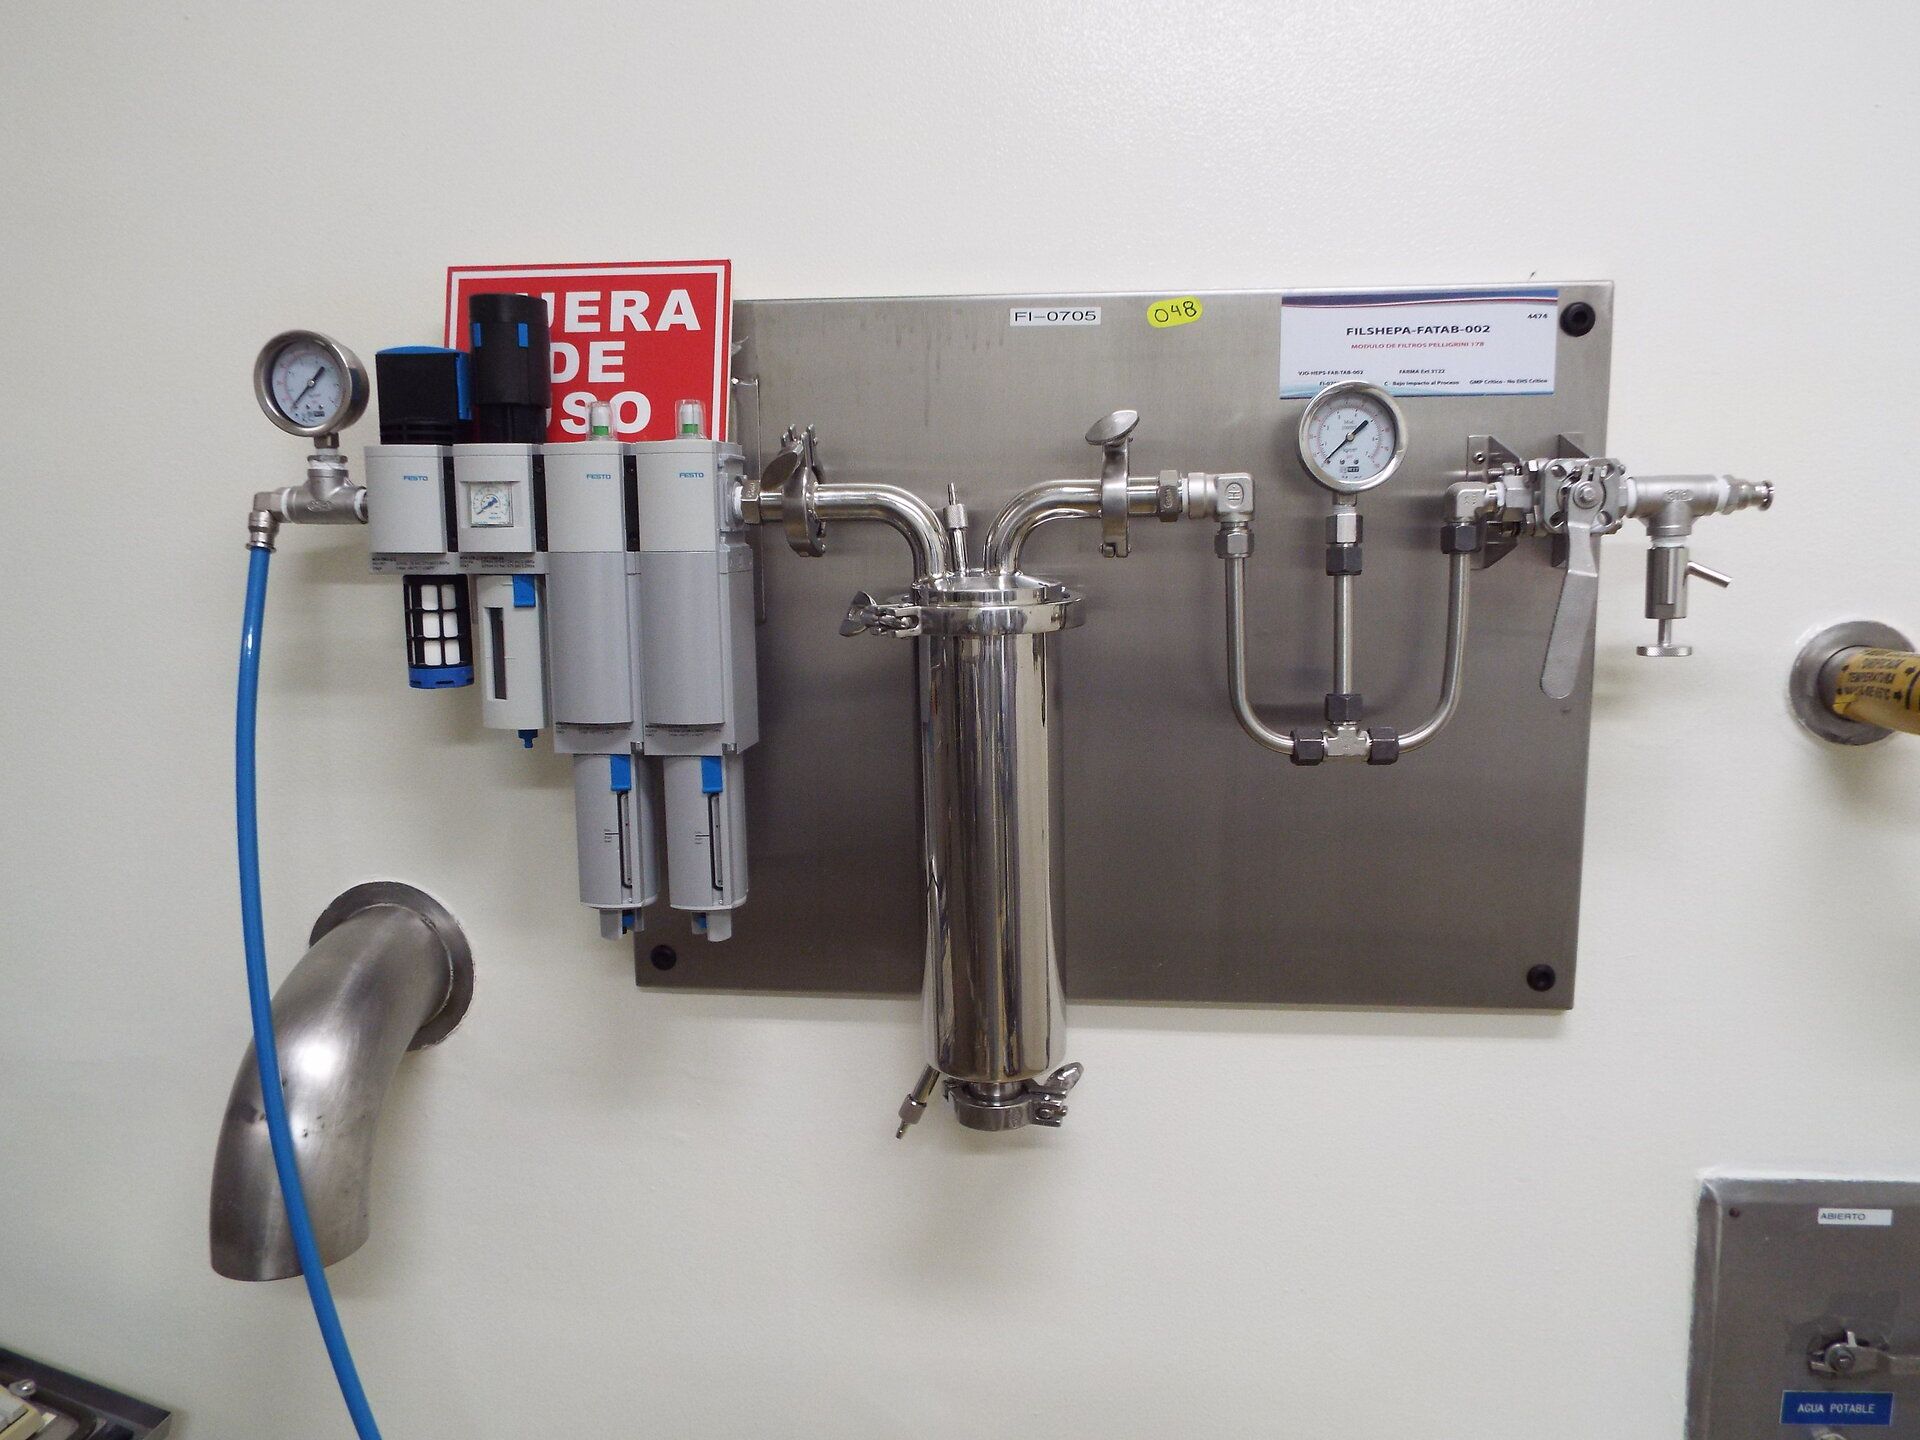 Pellegrini stainless steel 48" model HT-MT150 coating system with 2 spray pumps nozzles and cip pump - Image 4 of 17